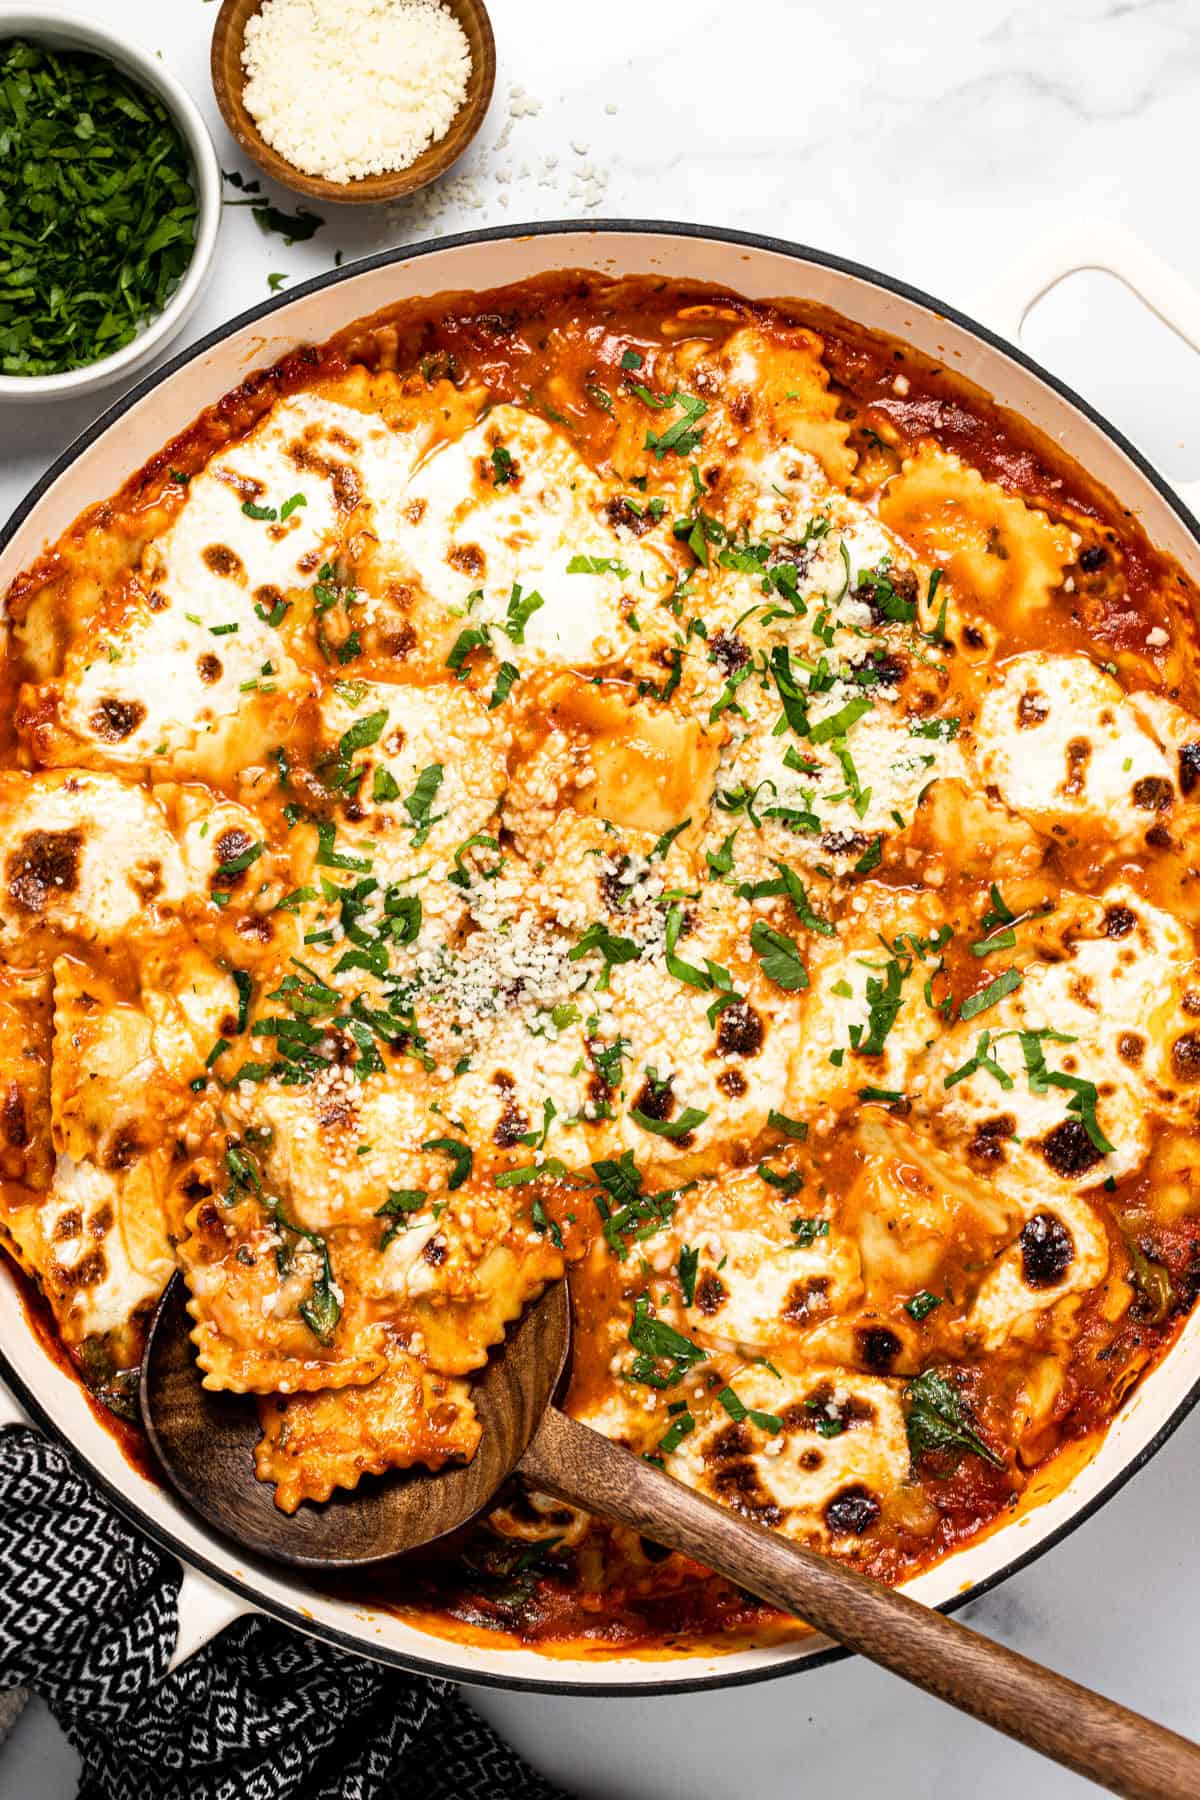 Large white pan filled with baked ravioli casserole garnished with fresh parsley